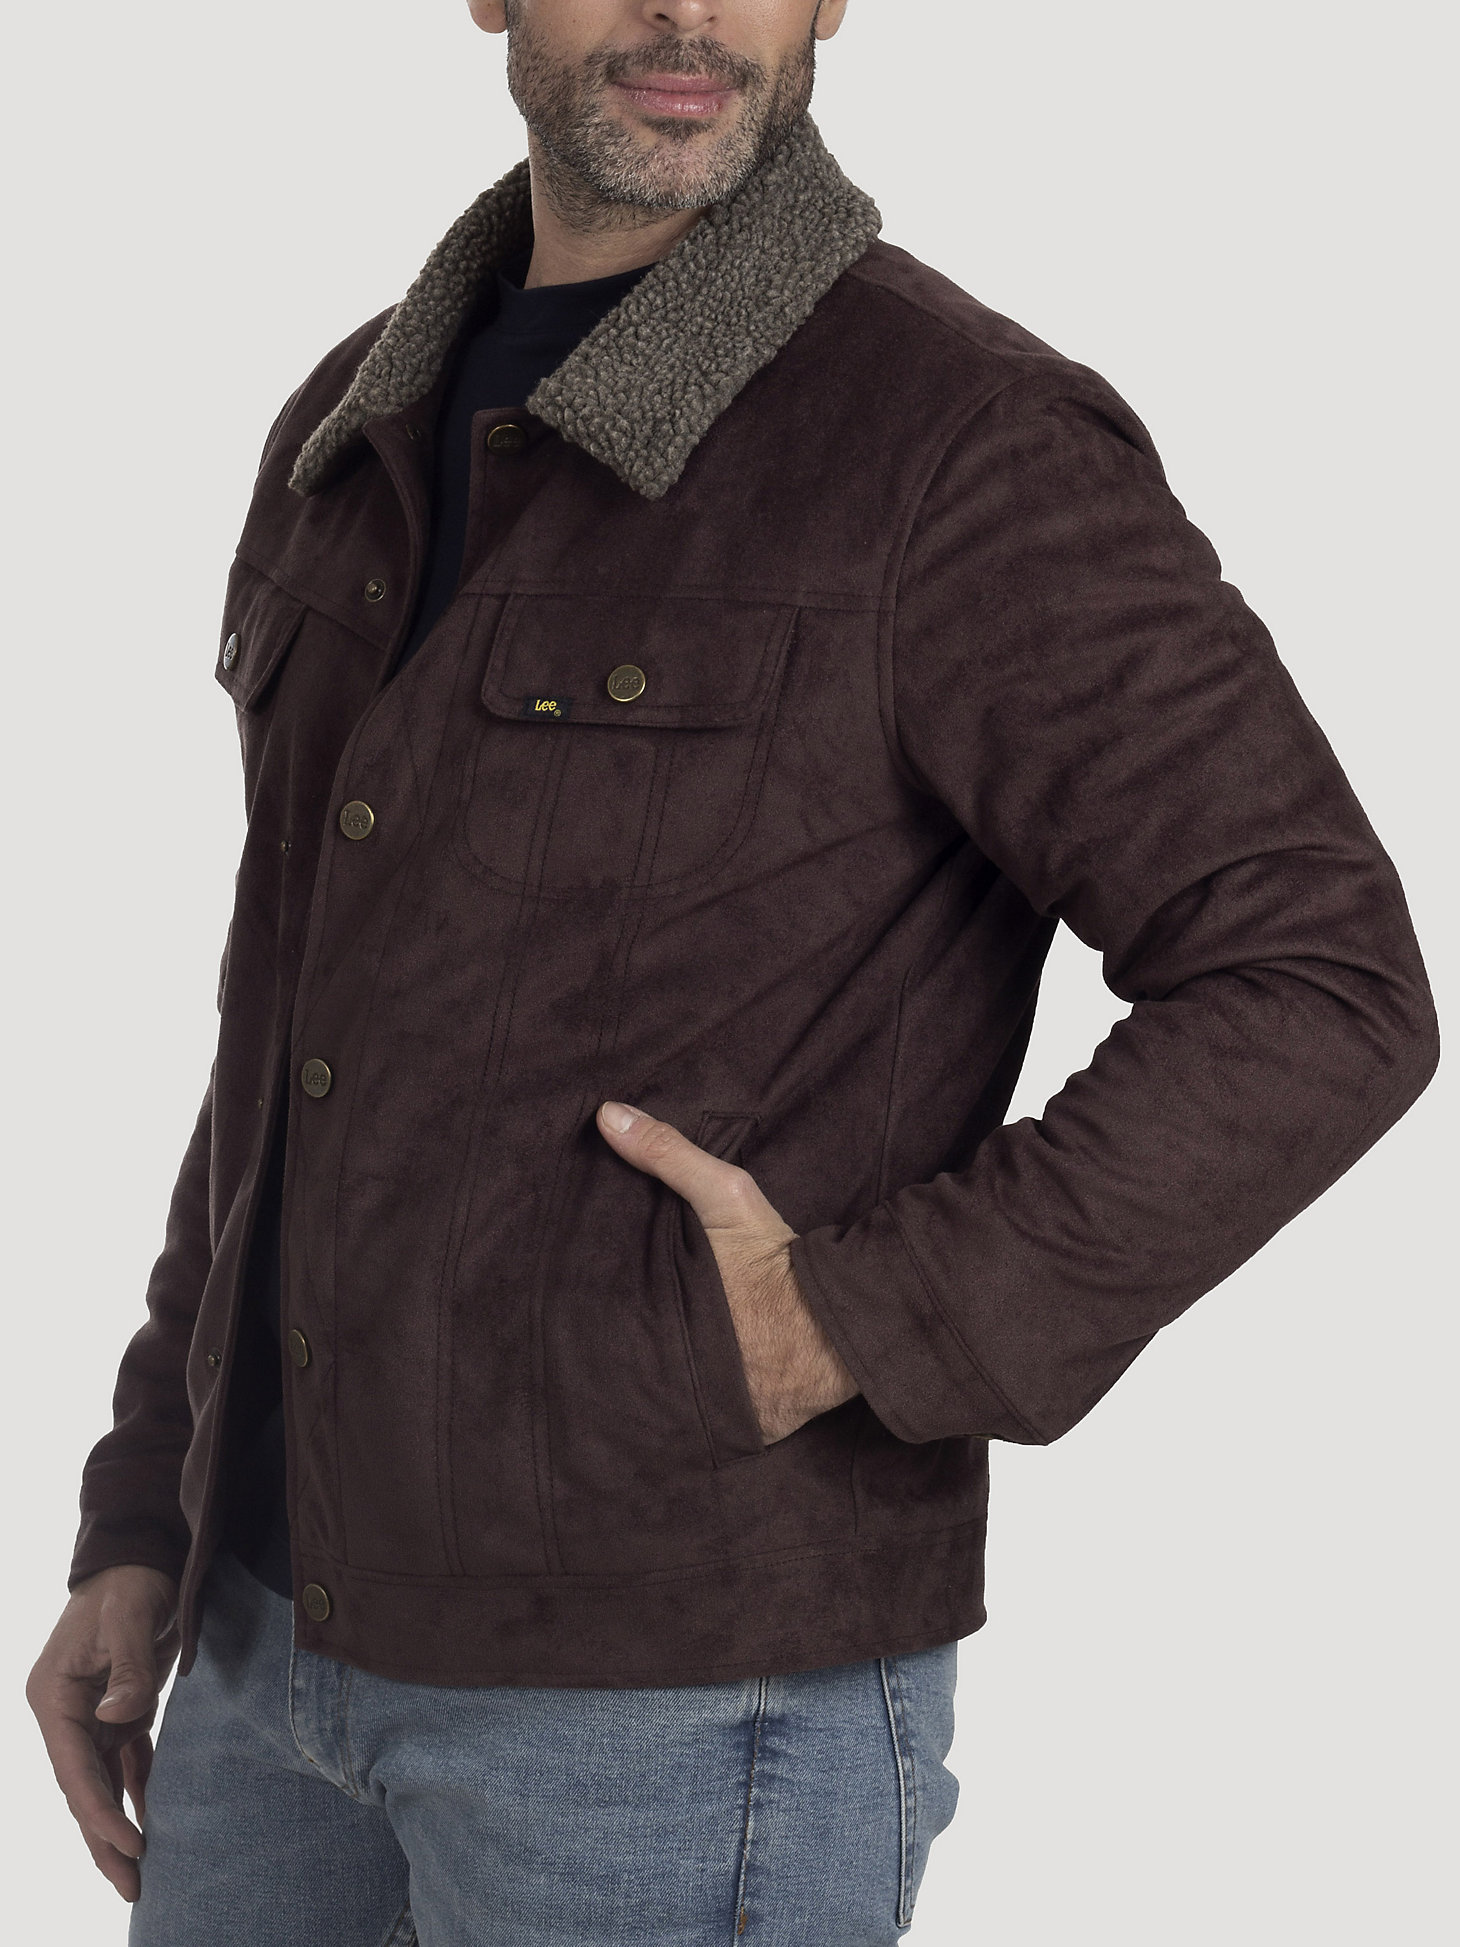 Men's Faux Leather Historic Vintage Sherpa Lined Jacket in Dark Brown alternative view 2